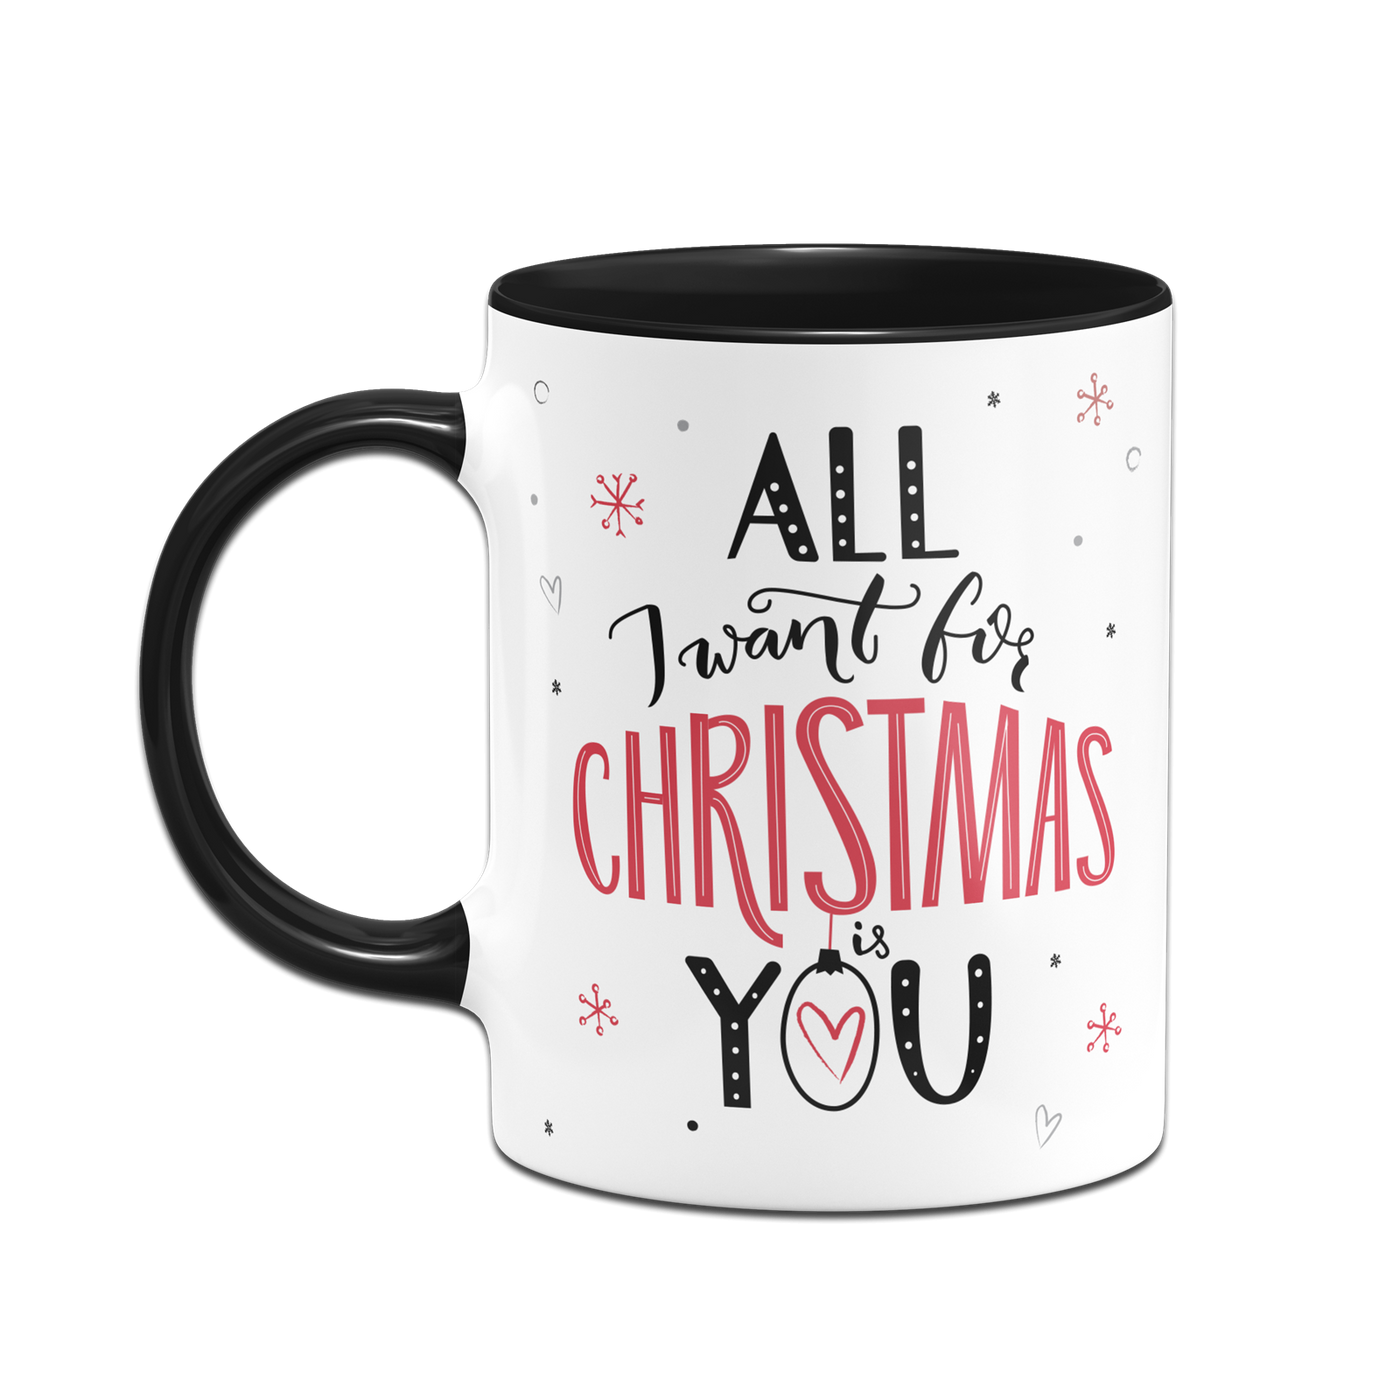 Tasse - All I want for Christmas is you